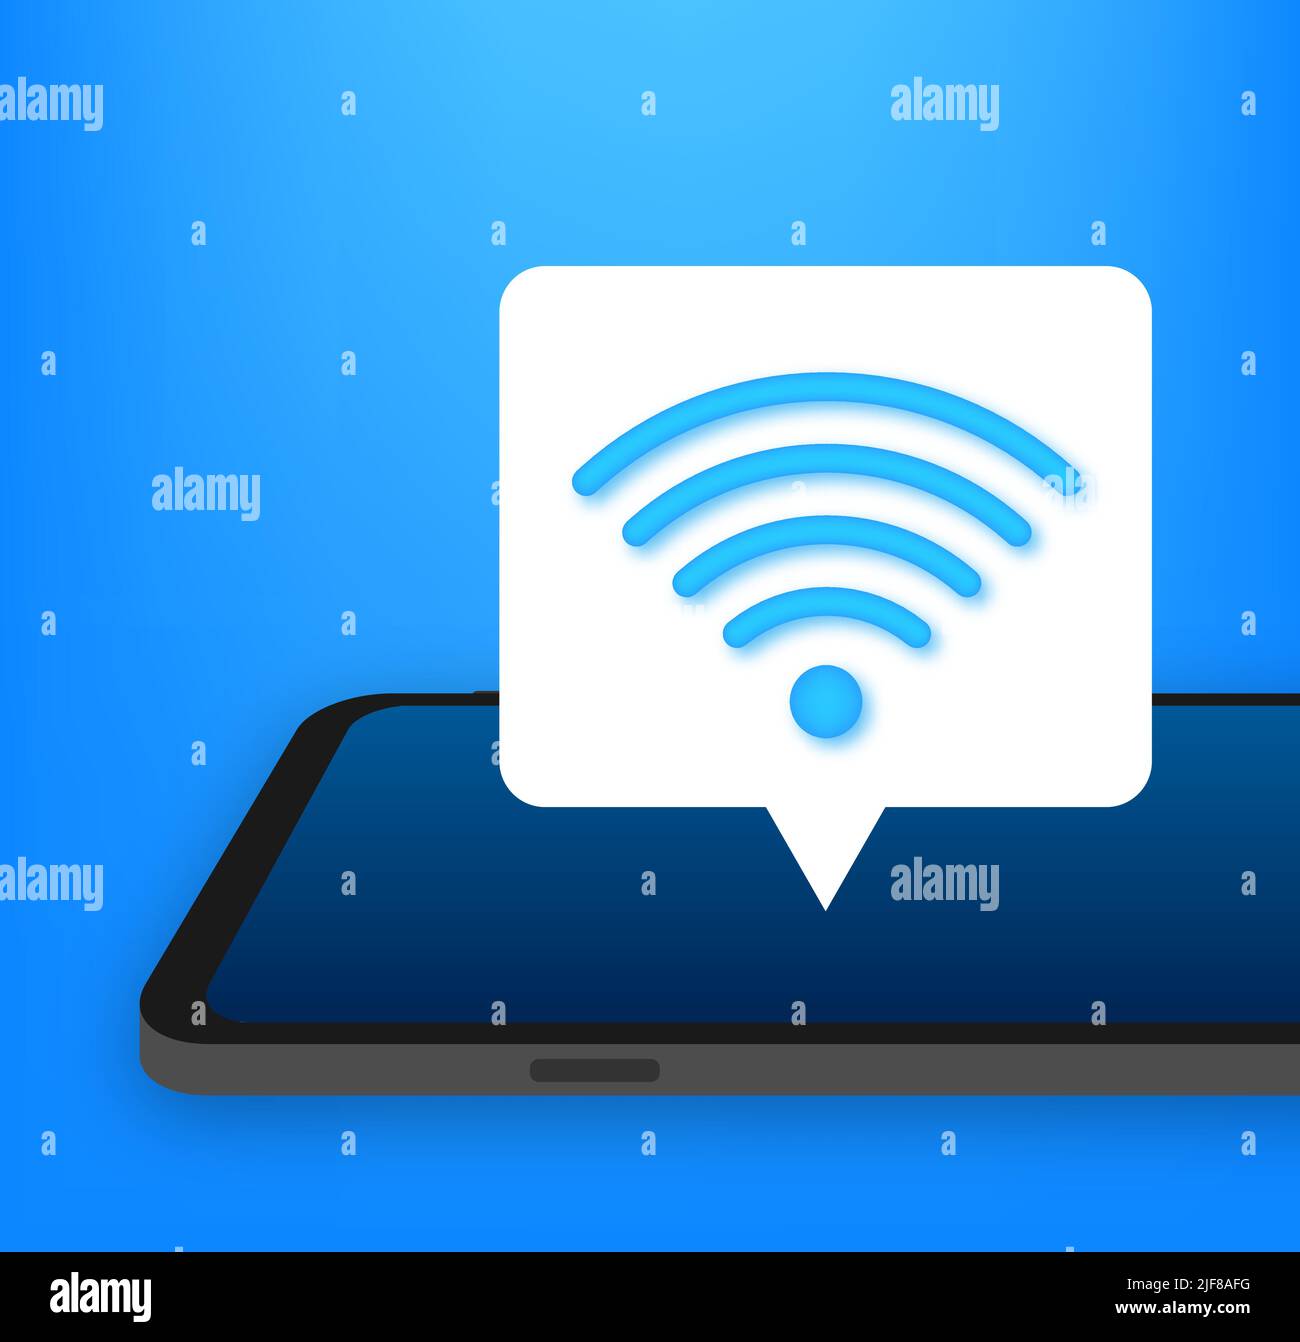 Wireless technology. Wifi internet connection on smartphone screen. Vector stock illustration. Stock Vector